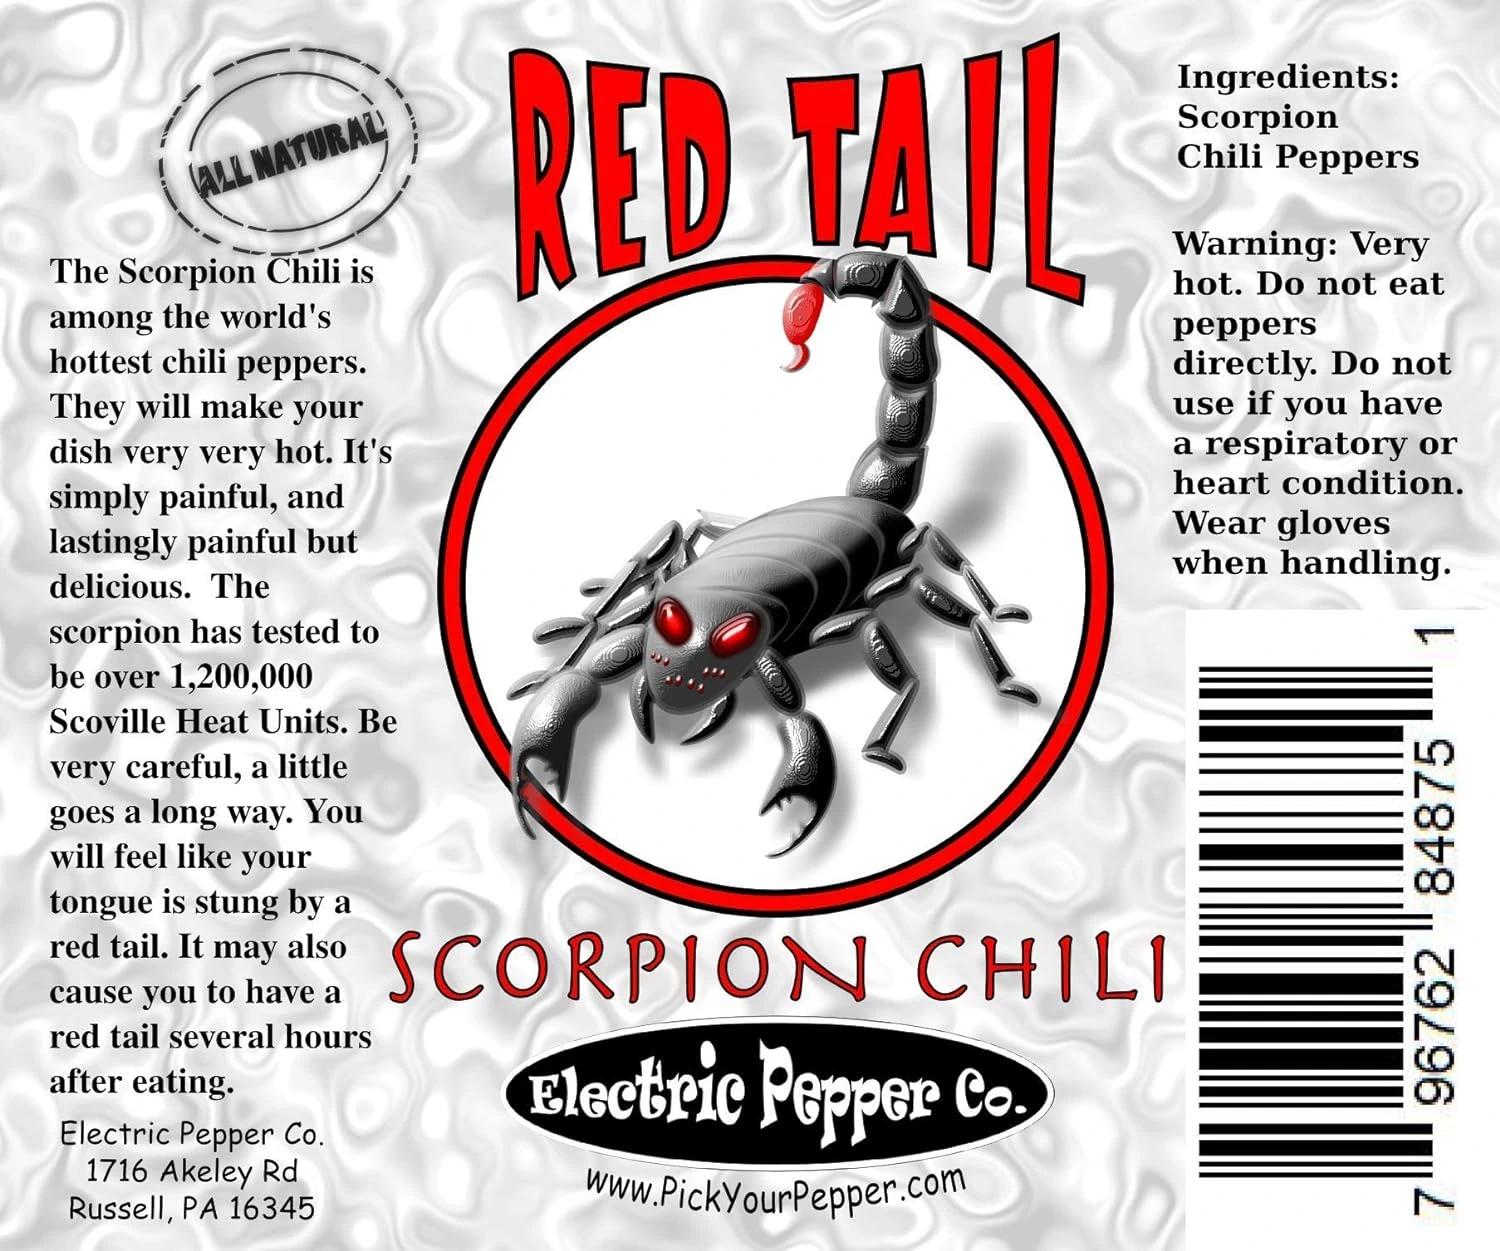 Product Label For Red Tail Scorpion - 
25 Peppers